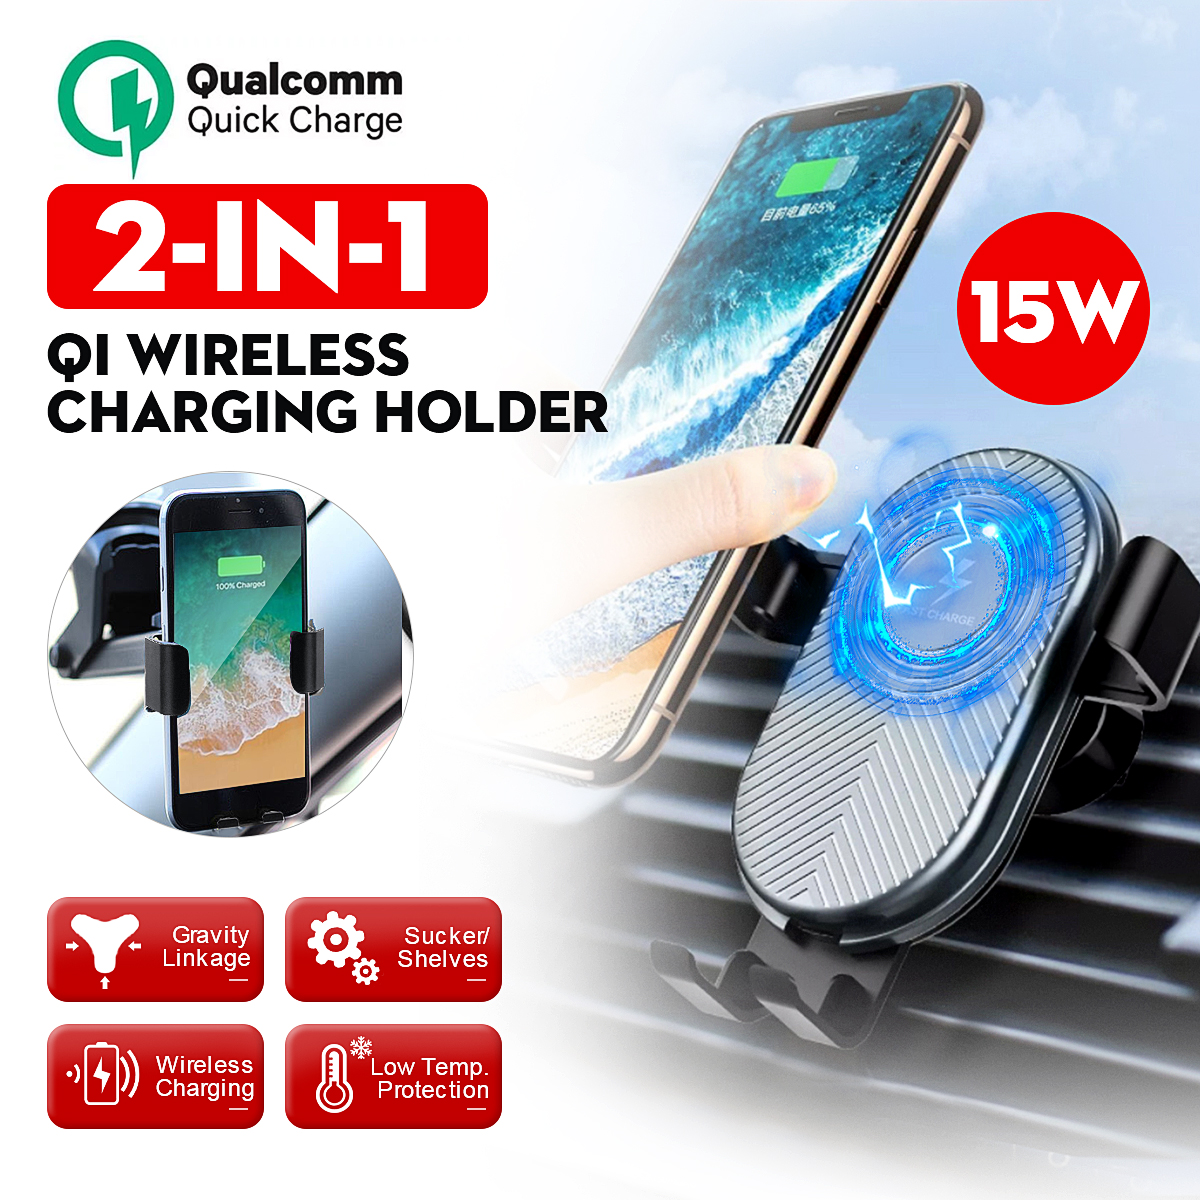 15W-Qi-Wireless-Charger-Fast-Charging-Gravity-Linkage-Air-Vent-Car-Phone-Holder-For-40-65-Inch-Smart-1572801-1